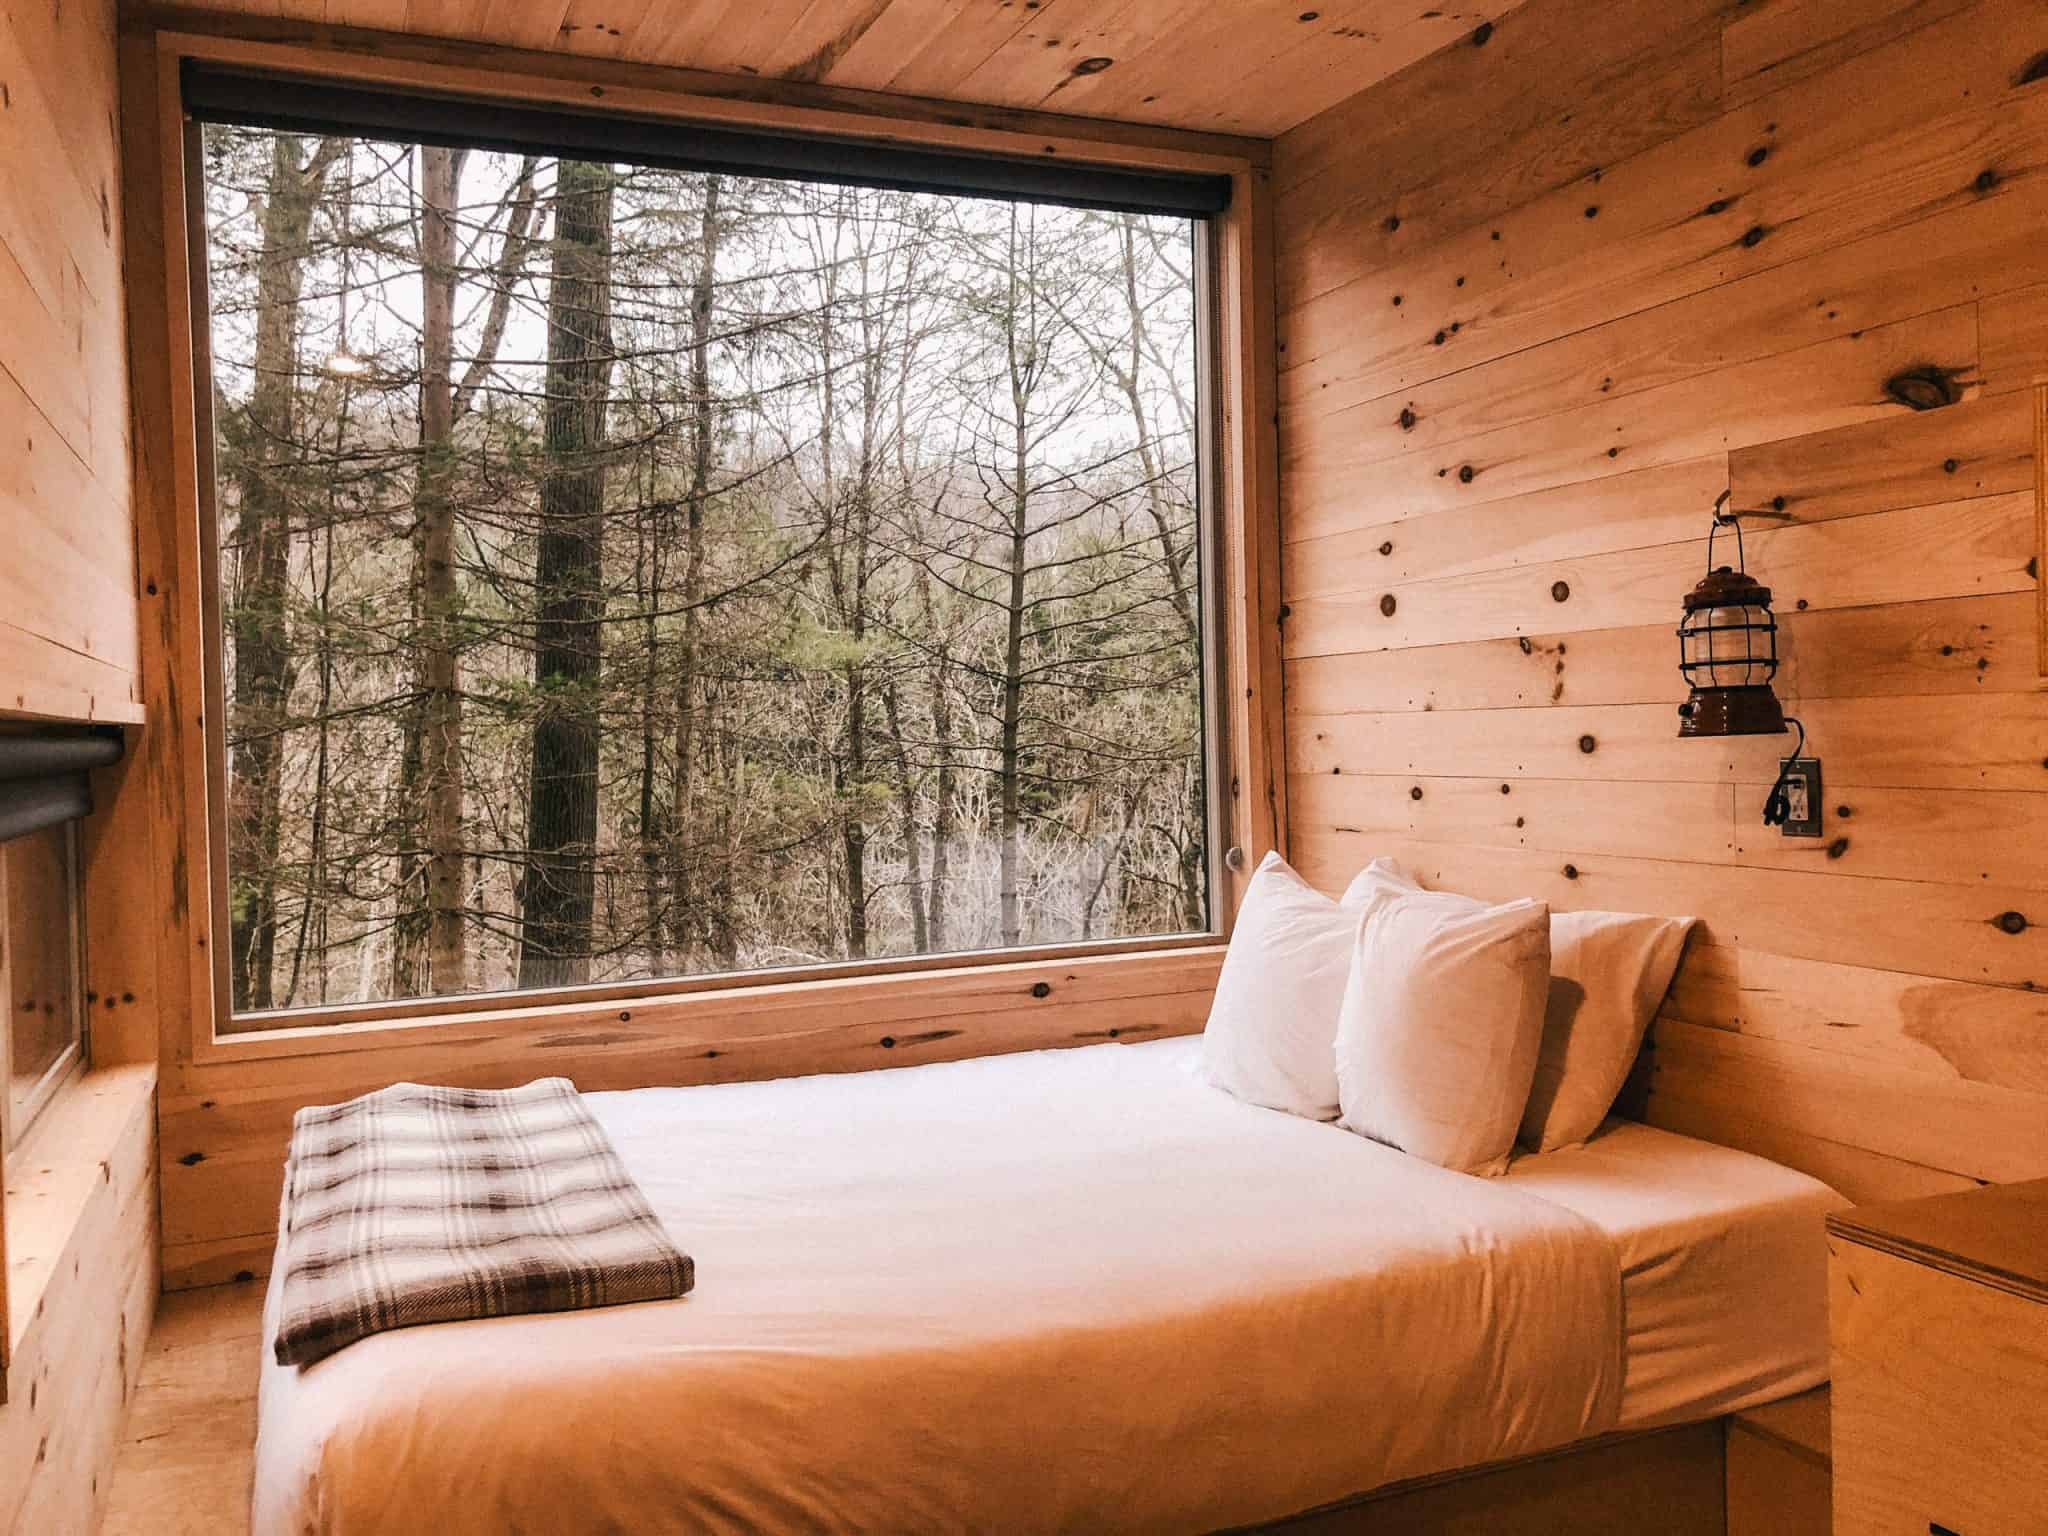 The Best Escape Into Nature With Getaway Cabins - Lost In Laurel Land